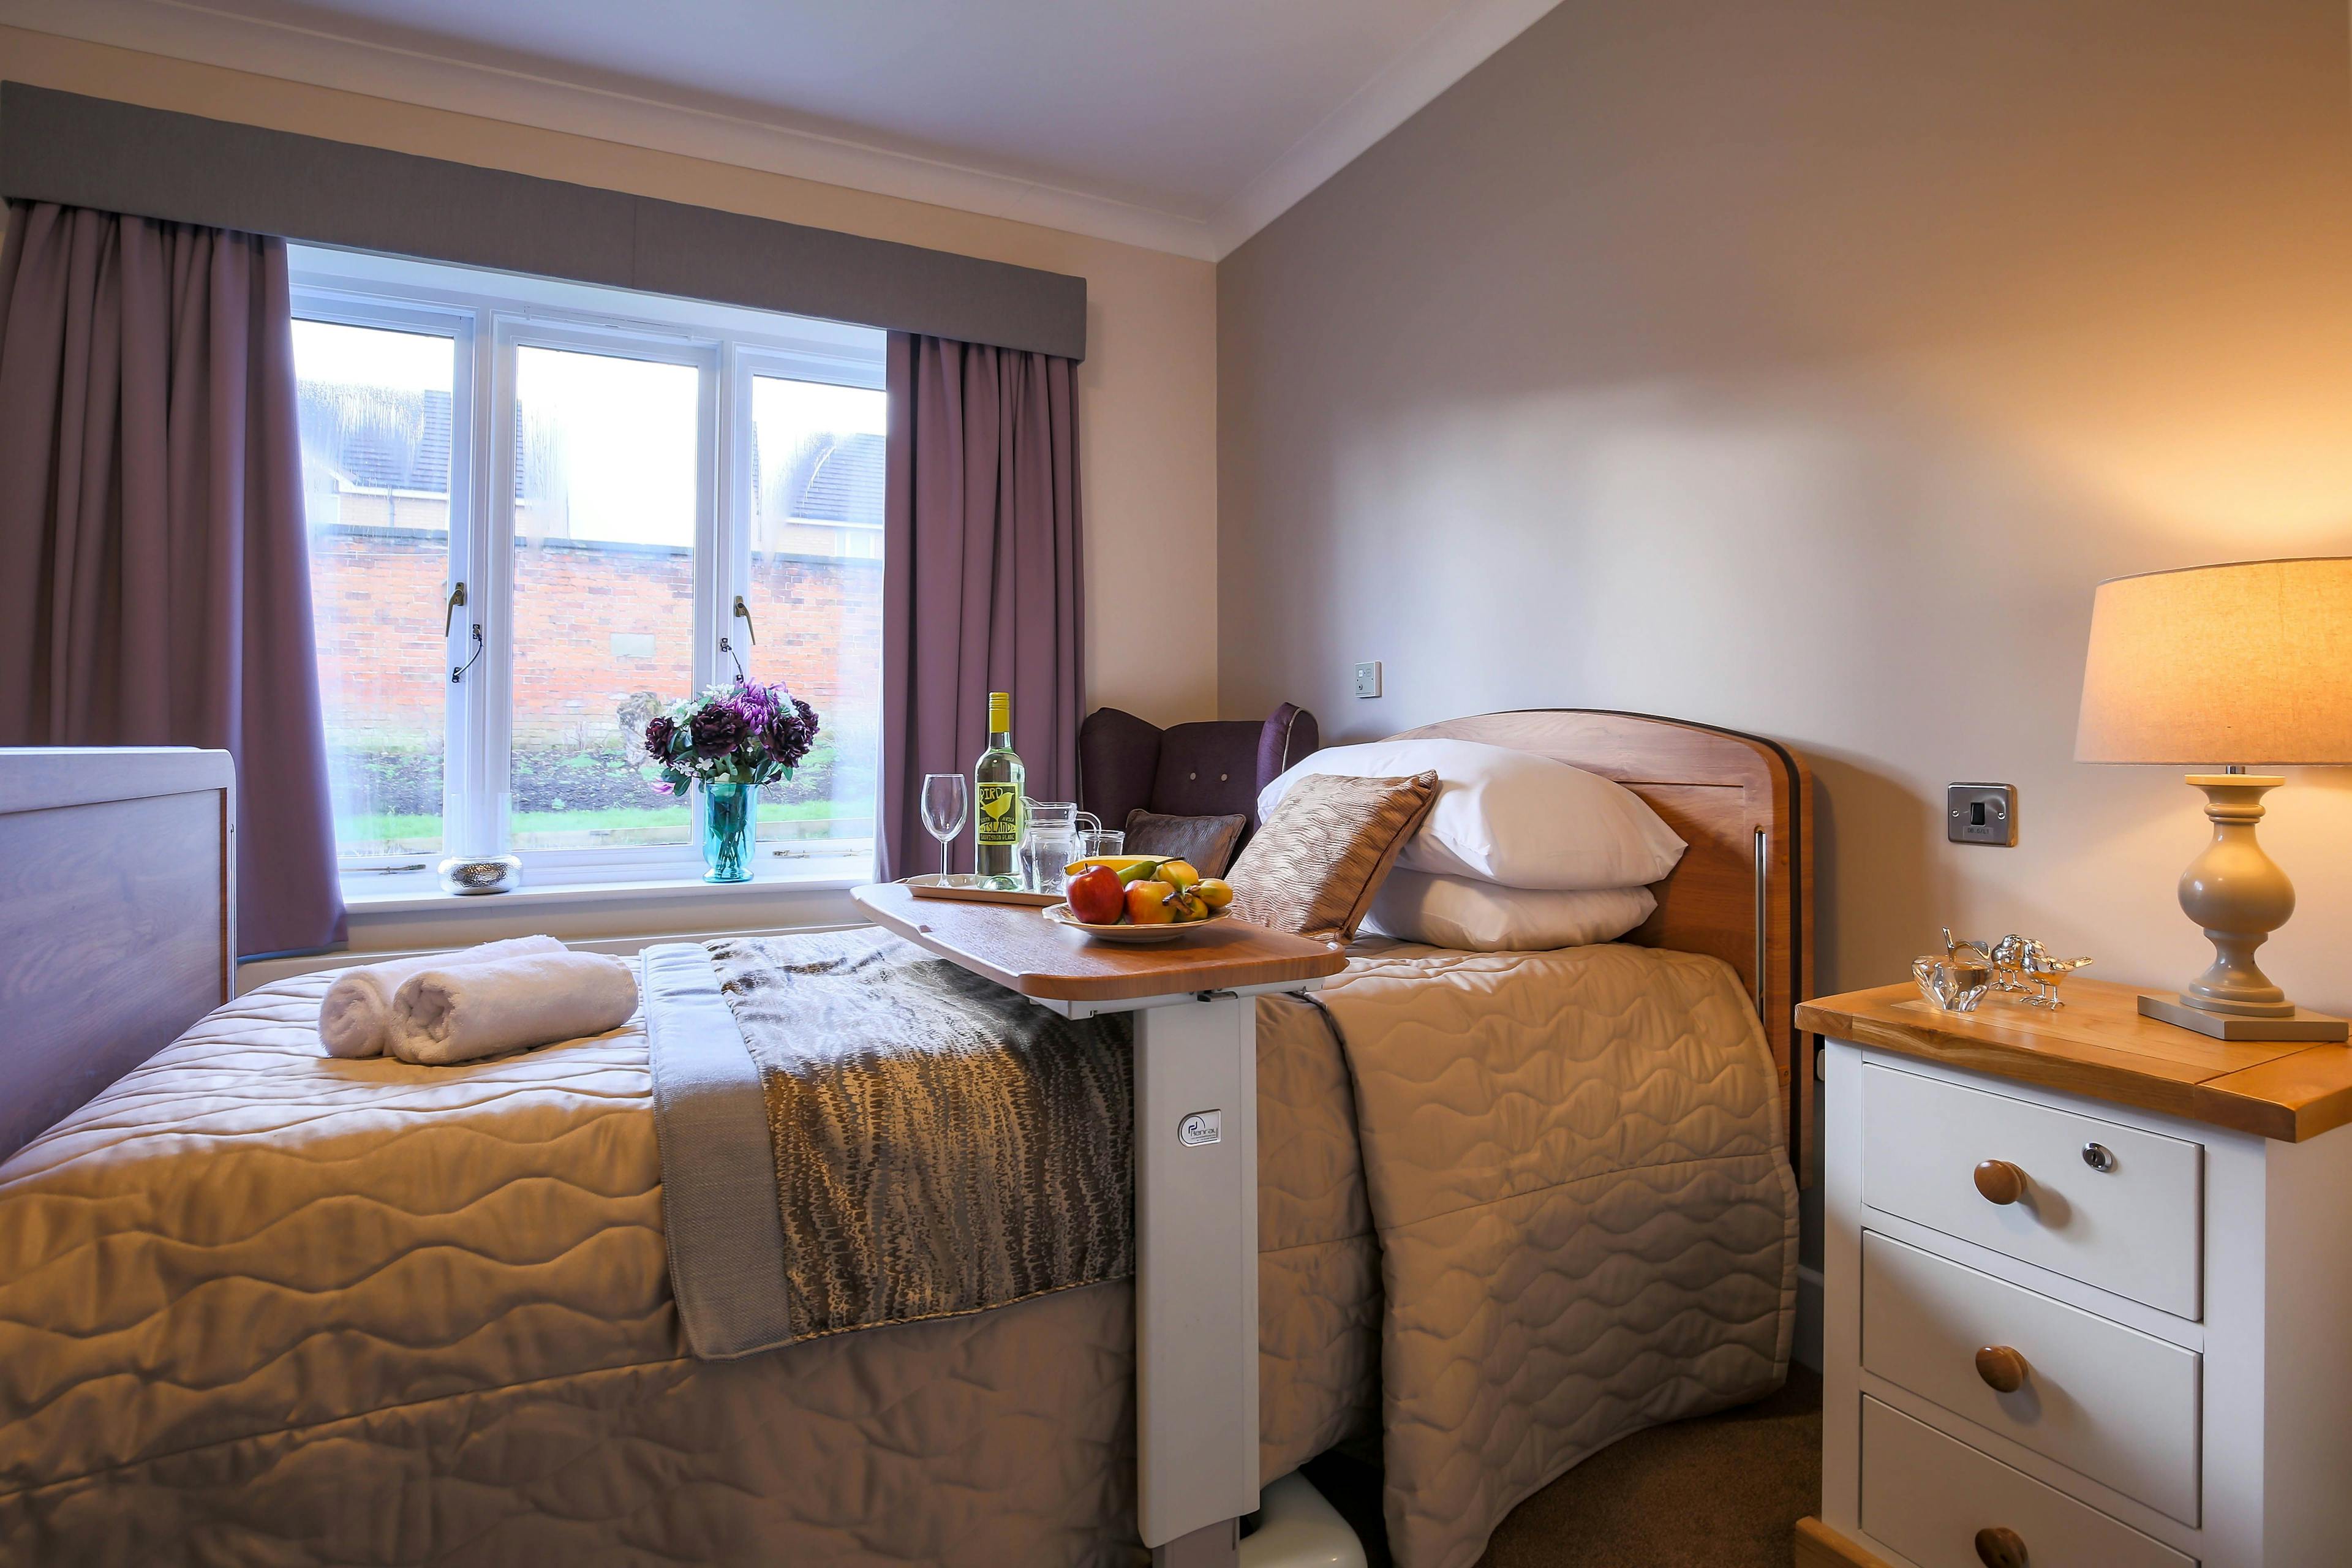 Bedroom in Ottley House Care Home in Shrewsbury, Shropshire